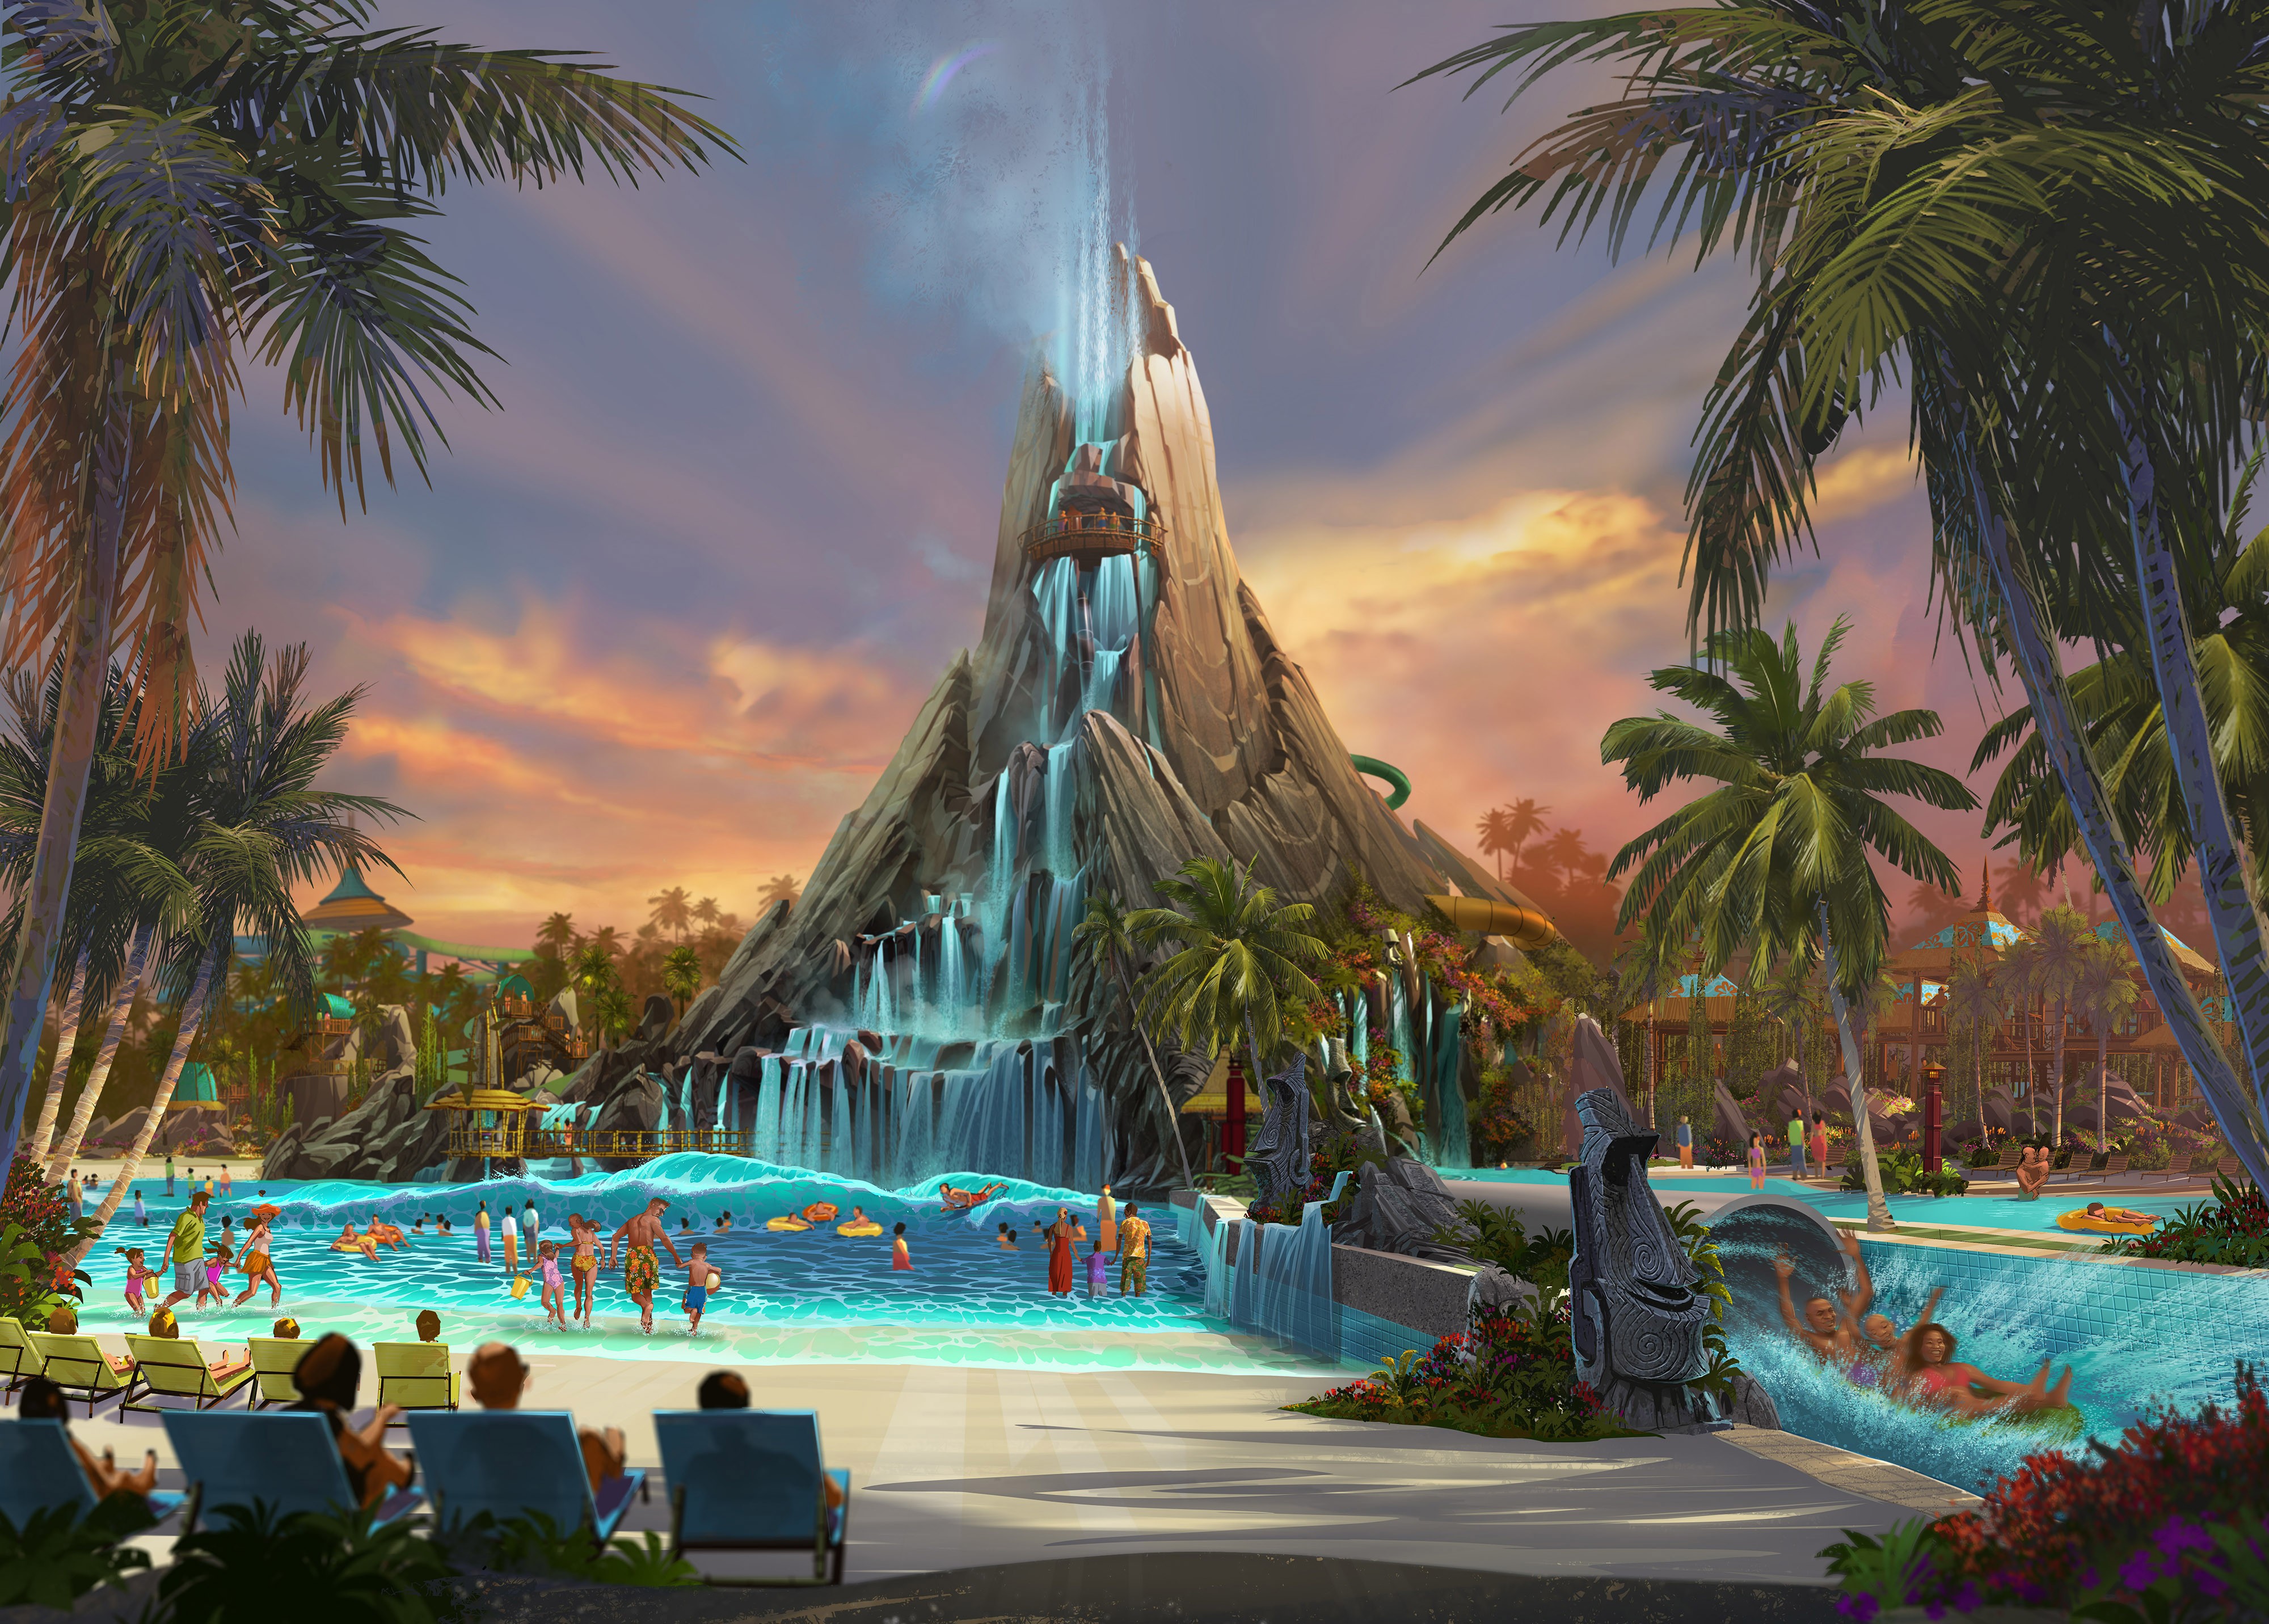 Universal's Volcano Bay is opening in less than a year, here's